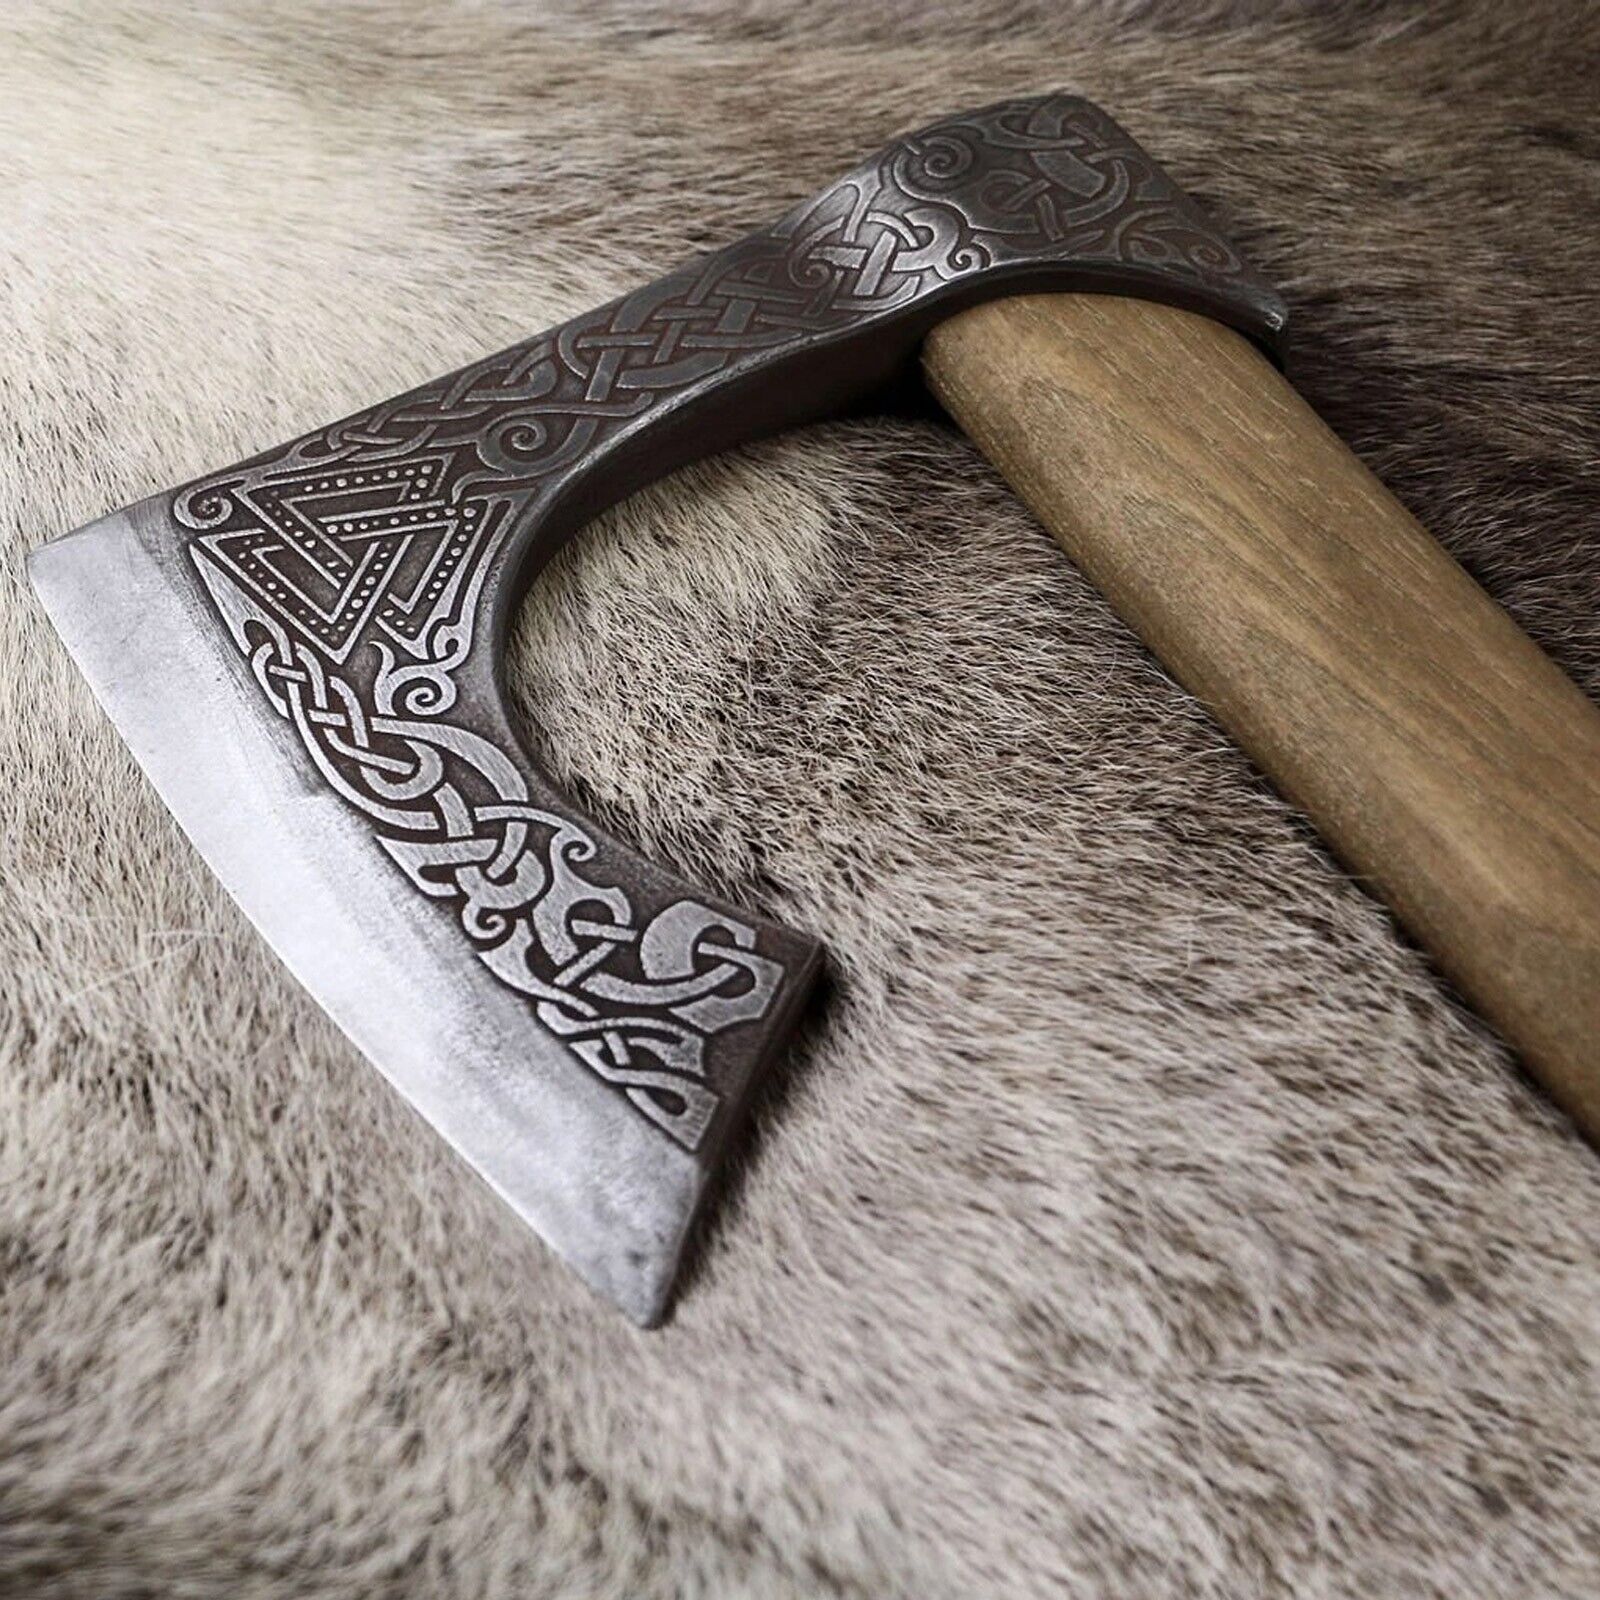 Handmade Carbon Steel Hunting Axe Bearded Hatchet Norse Best For Xmas Gift Idea